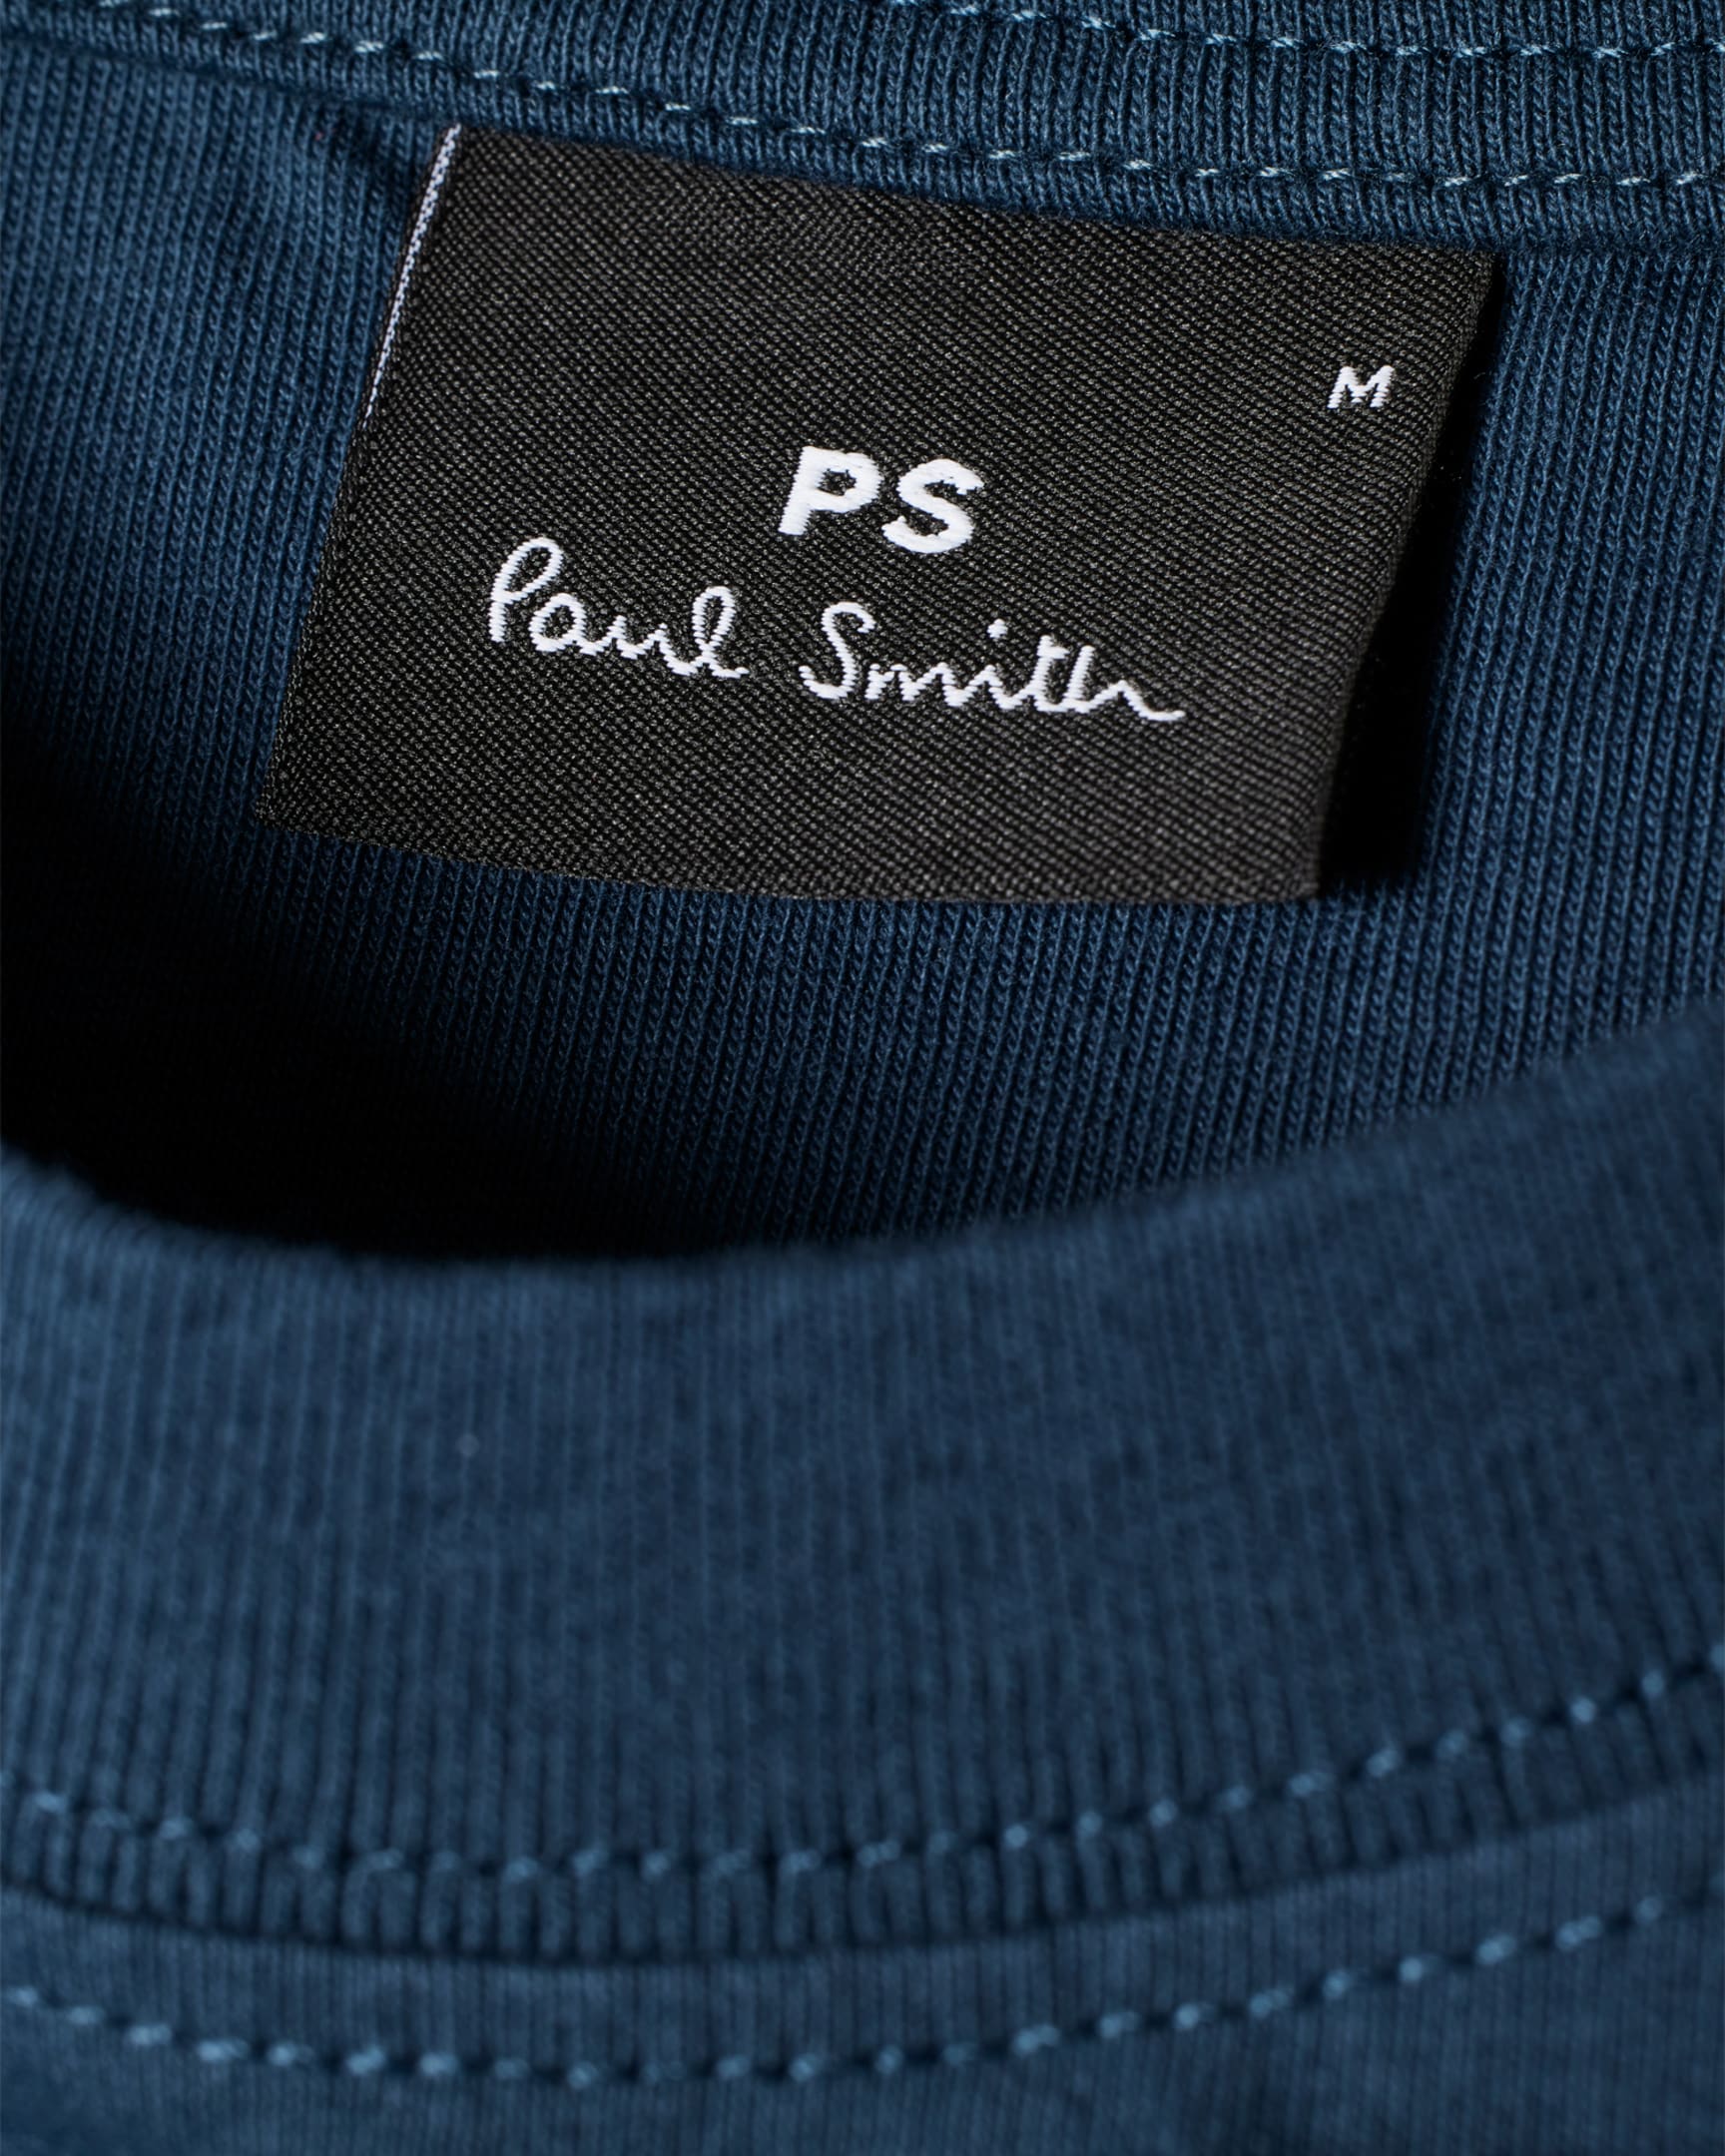 Detail View - Navy Cotton 'Happy' Wave T-Shirt Paul Smith